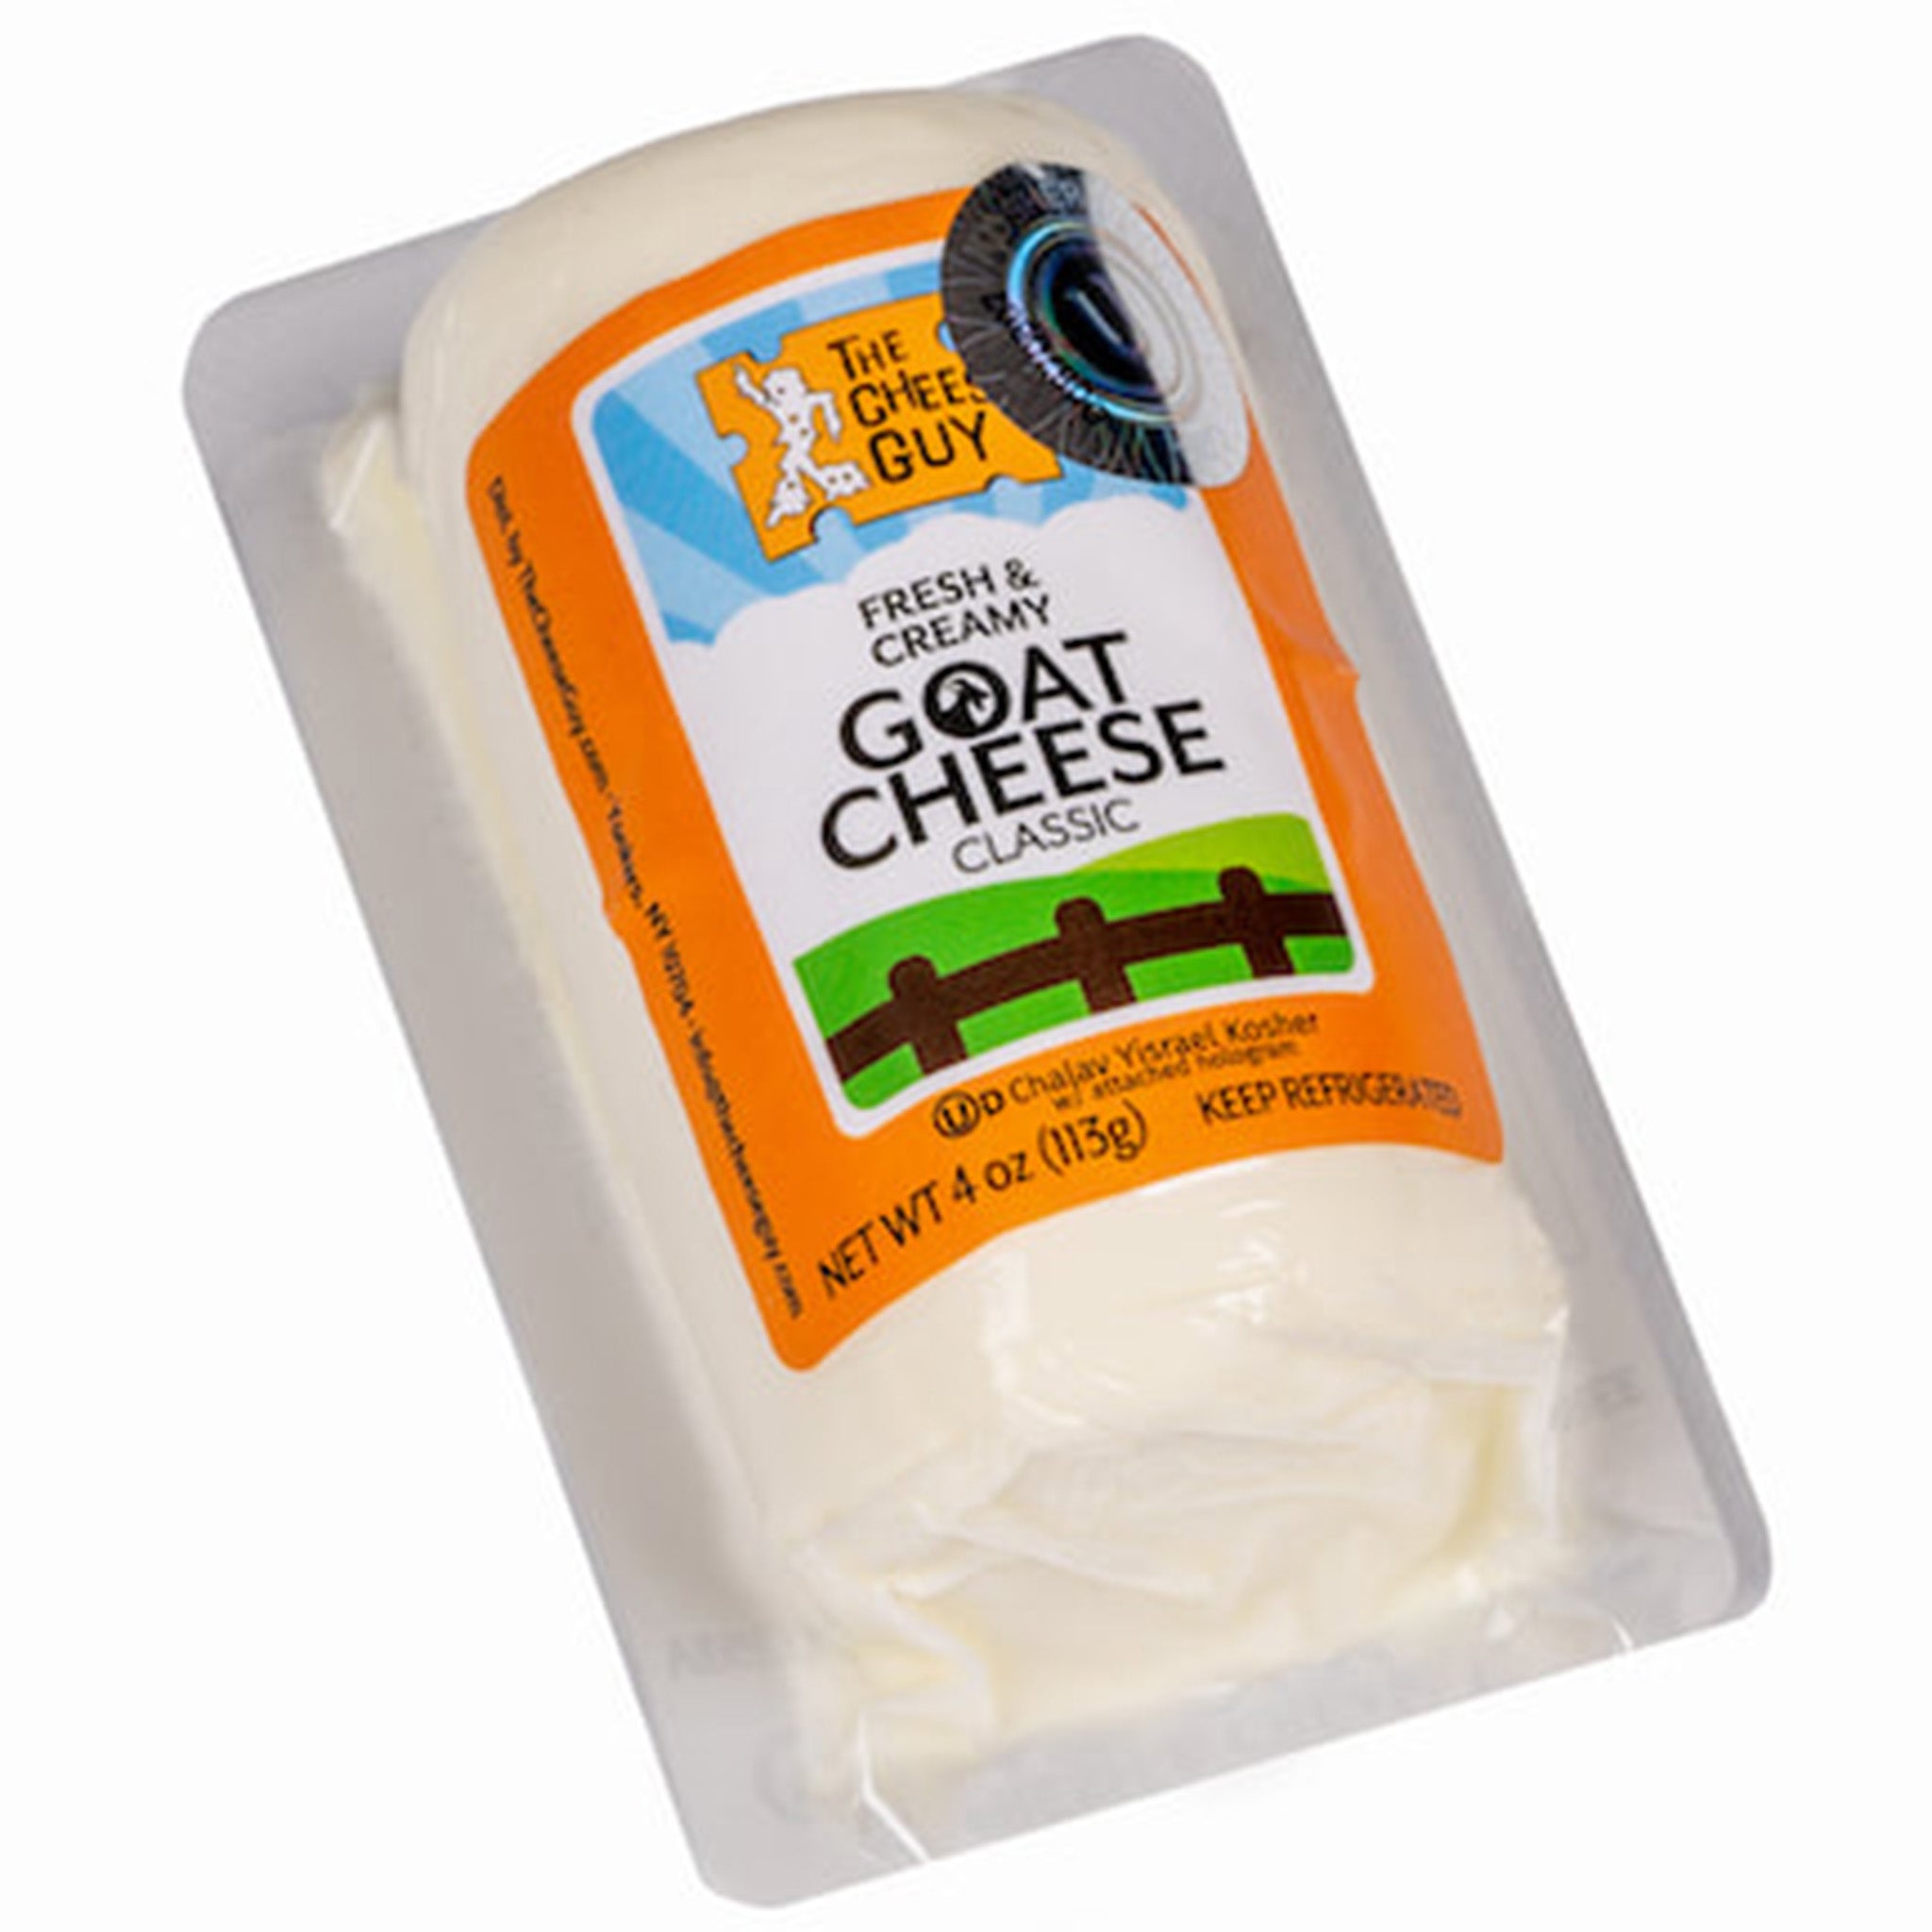 The cheese Guy Goat Cheese Classic 4oz 12ct